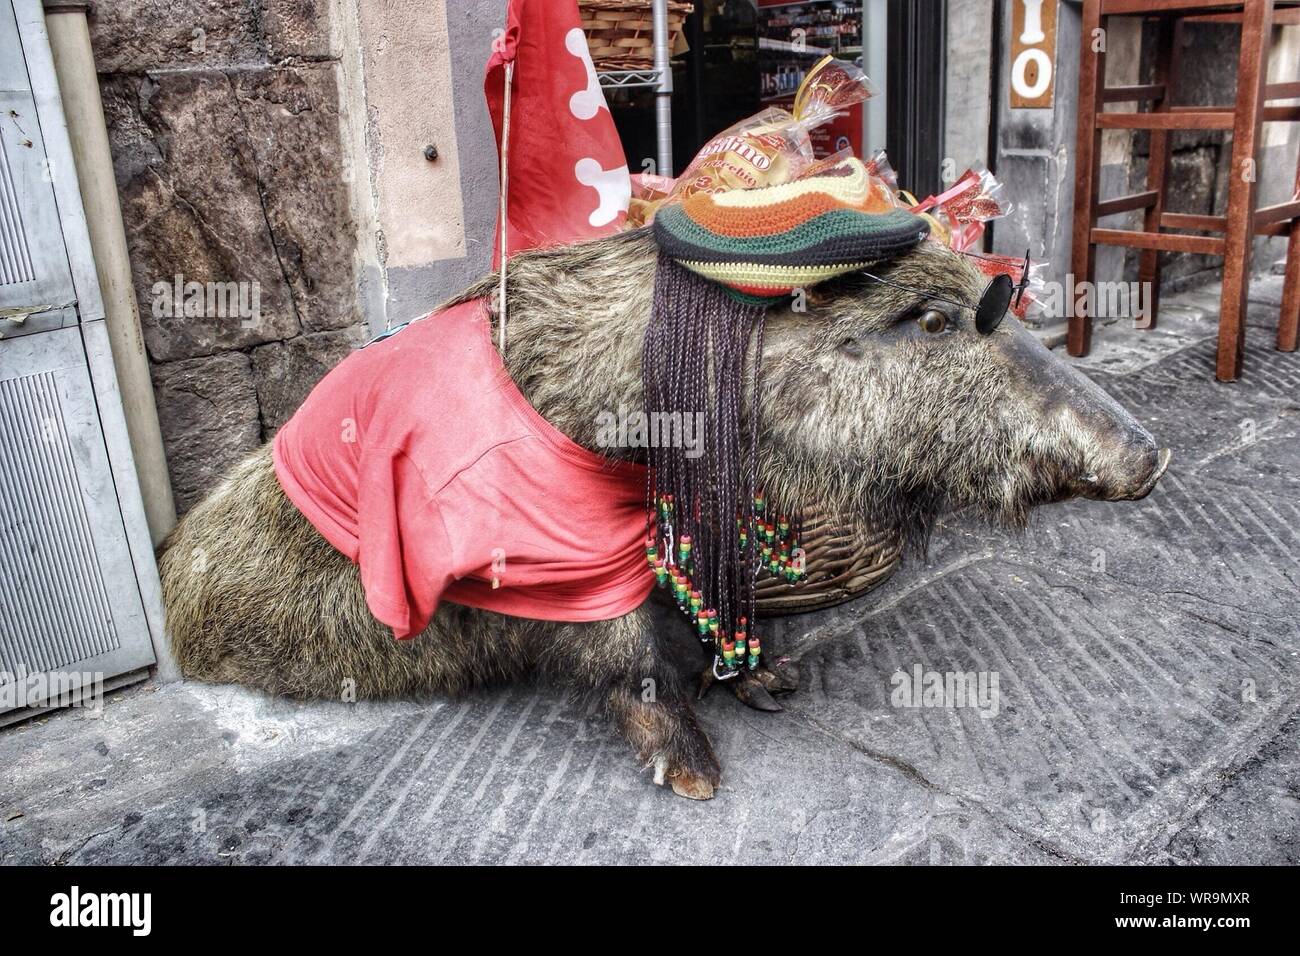 Decorated Wild Boar On The Street Stock Photo